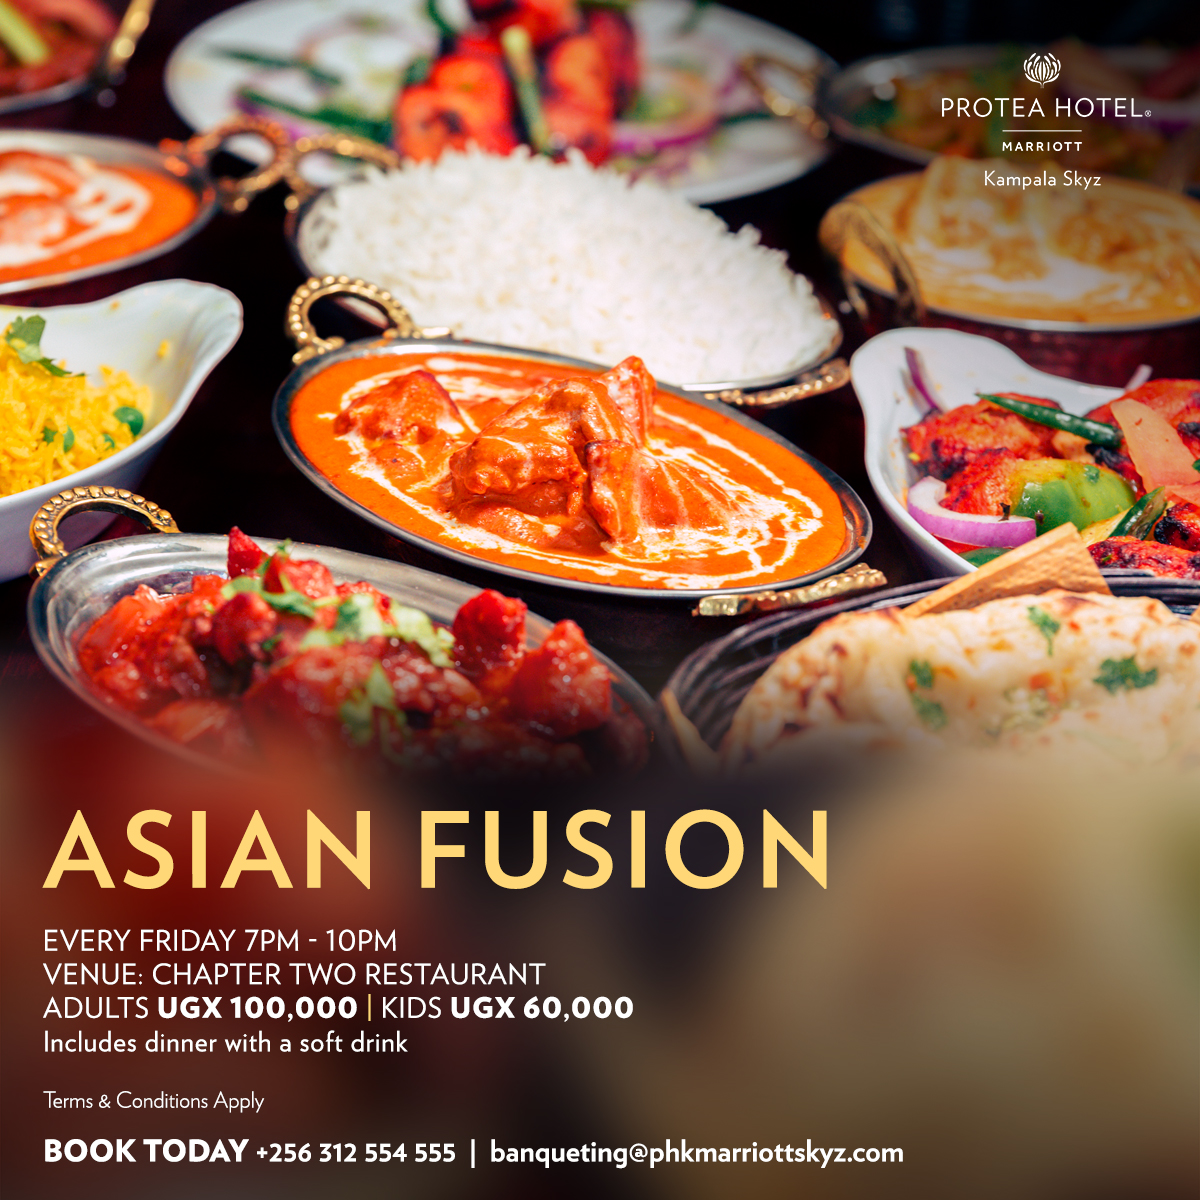 Take your taste buds on a journey with our Asian Fusion menu at Chapter Two Restaurant.

Join us for an unforgettable dining experience with your friends and family.

Discover the vibrant flavors of Asia right here at Skyz Hotel.

#AsianFusion #CulinaryExperience #SkyzHotel